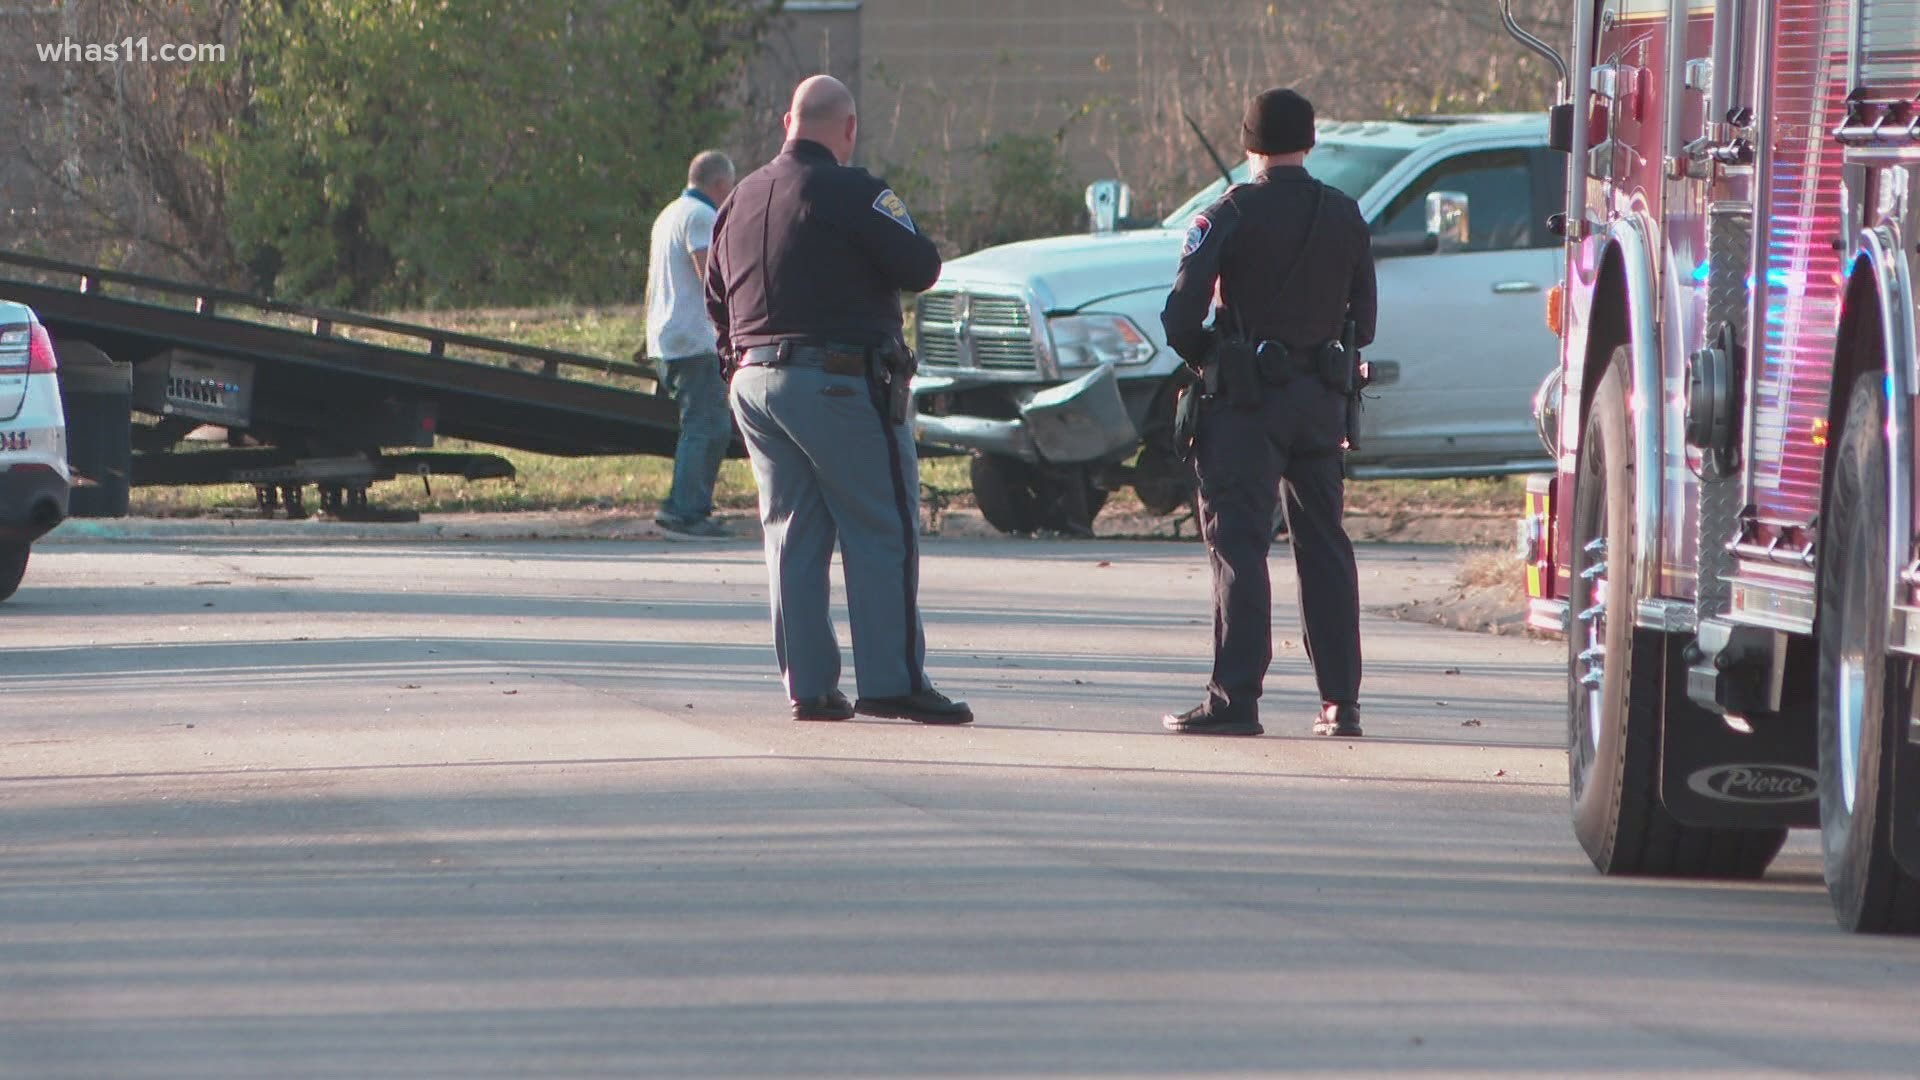 Police said the pursuit started in Louisville and ended on Hamburg Pike and Waverly Road in Jeffersonville